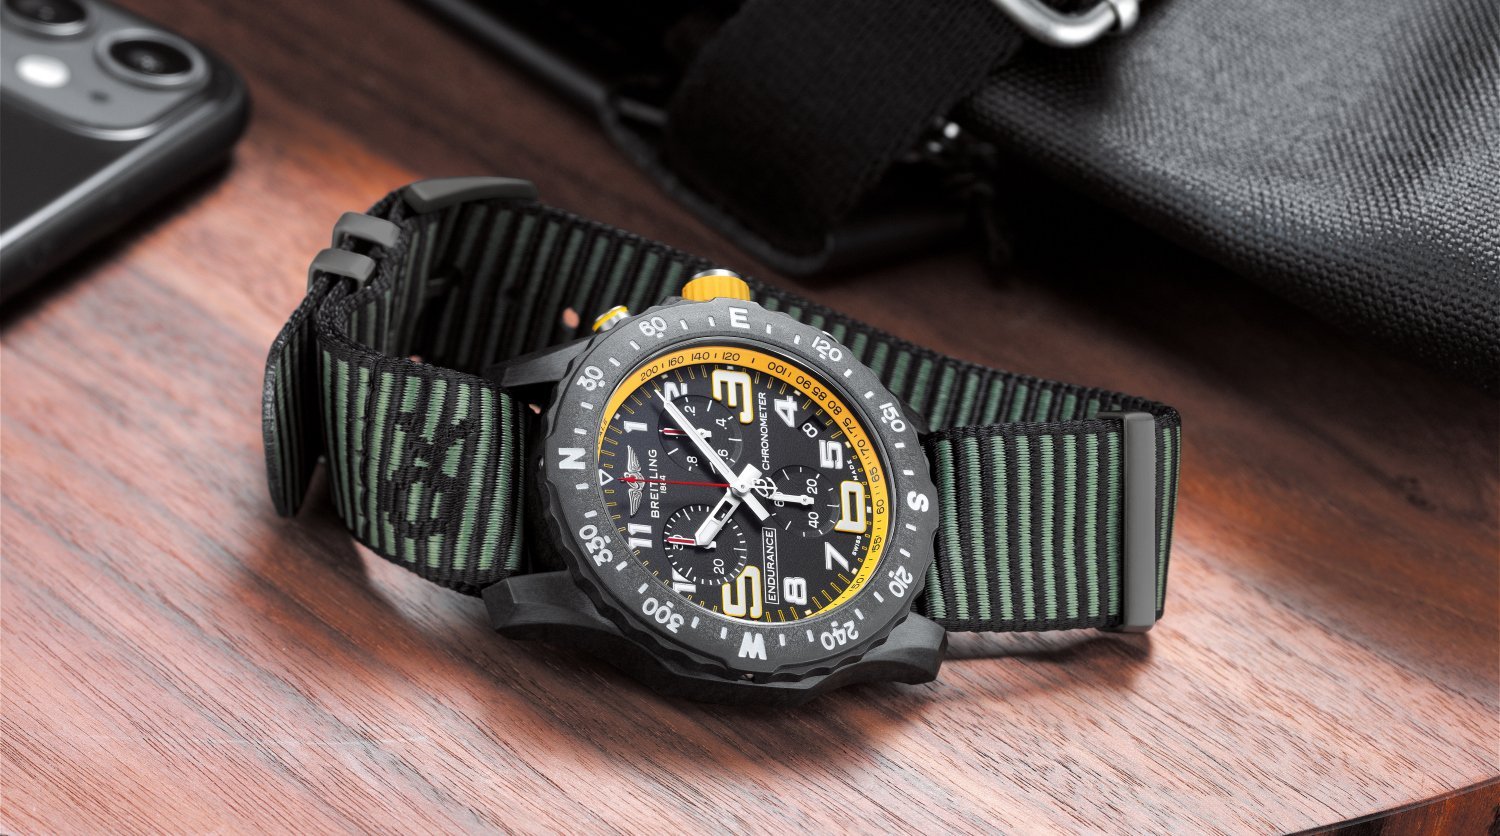 The new Breitling Endurance Pro